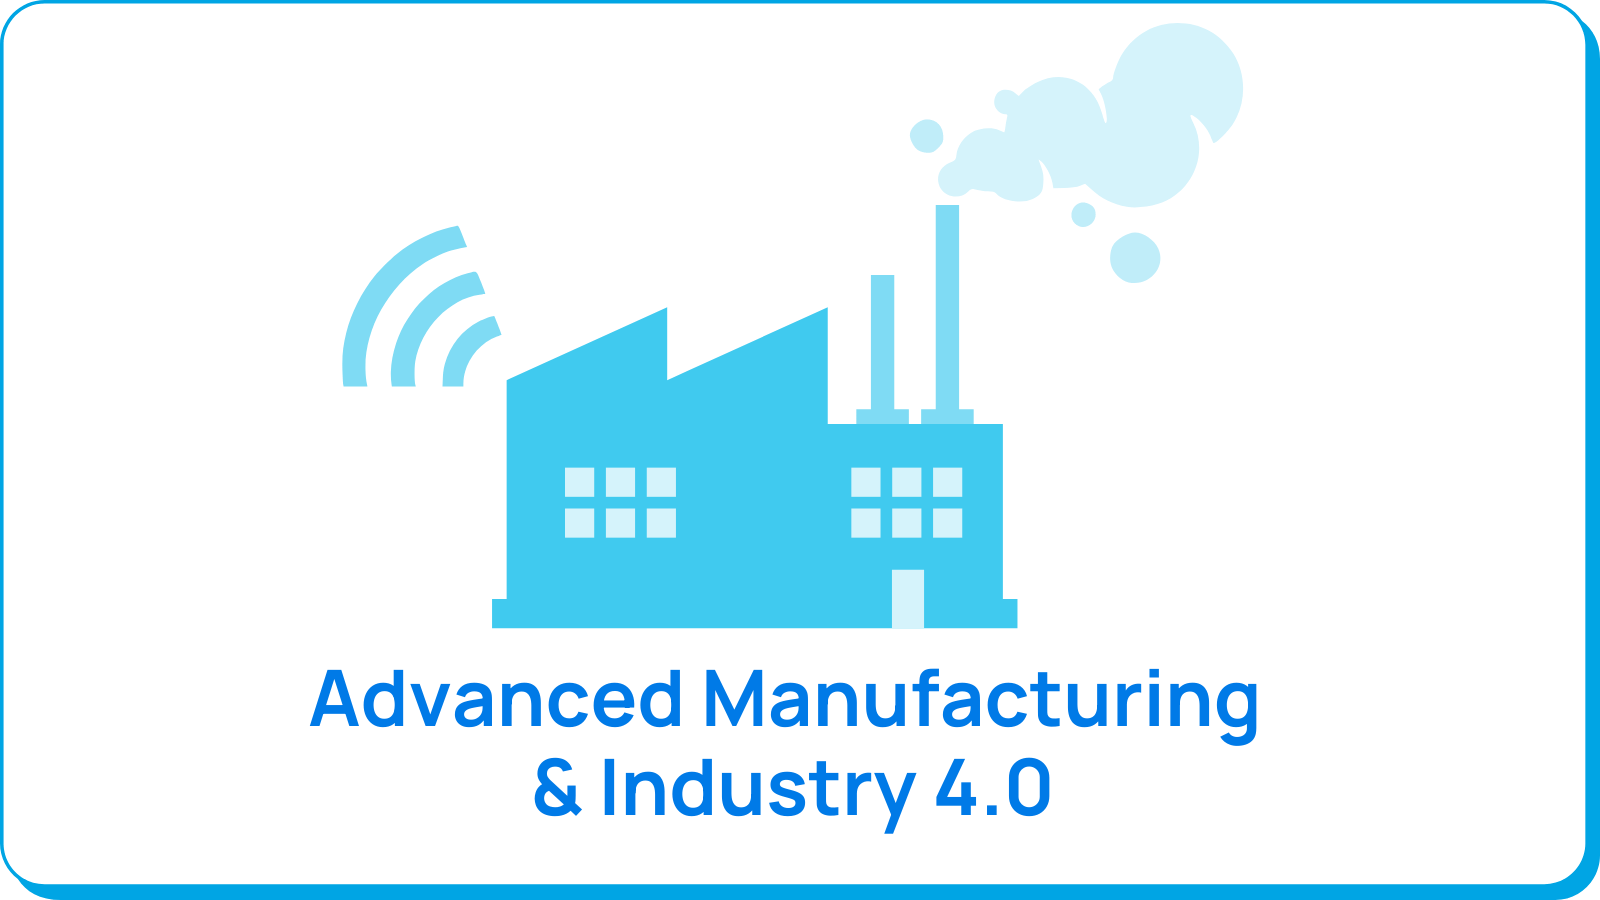 Organisational Design for Advanced Manufacturing and Industry 4.0.